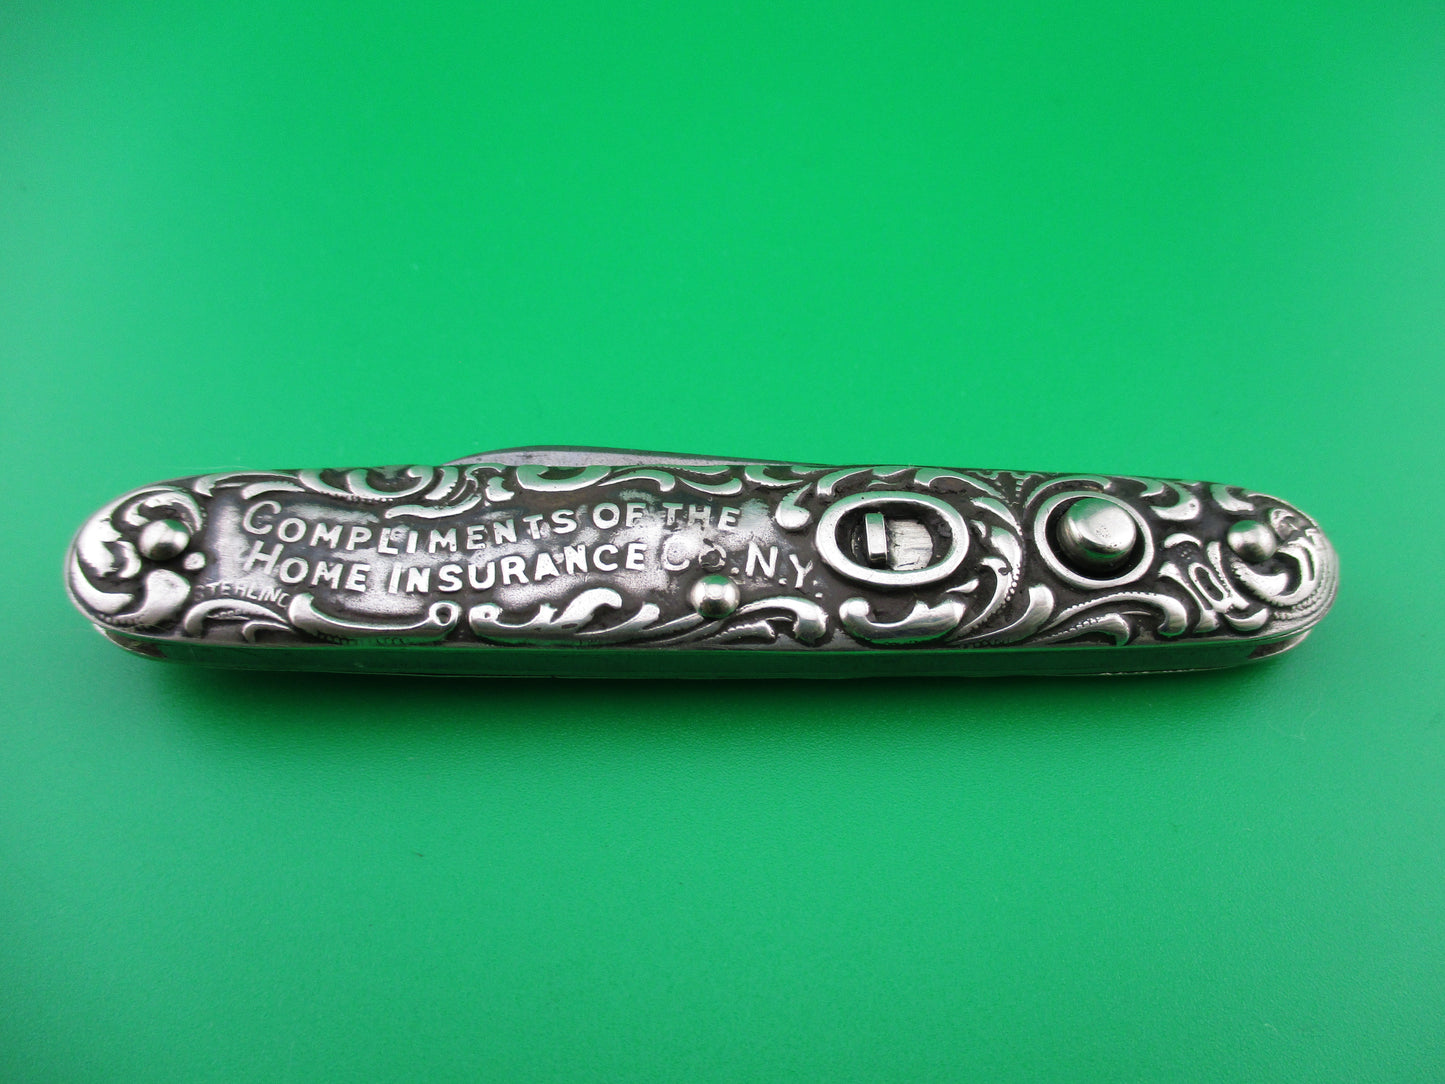 Schrade Cut Co medium double Sterling Silver Scroll switchblade knife